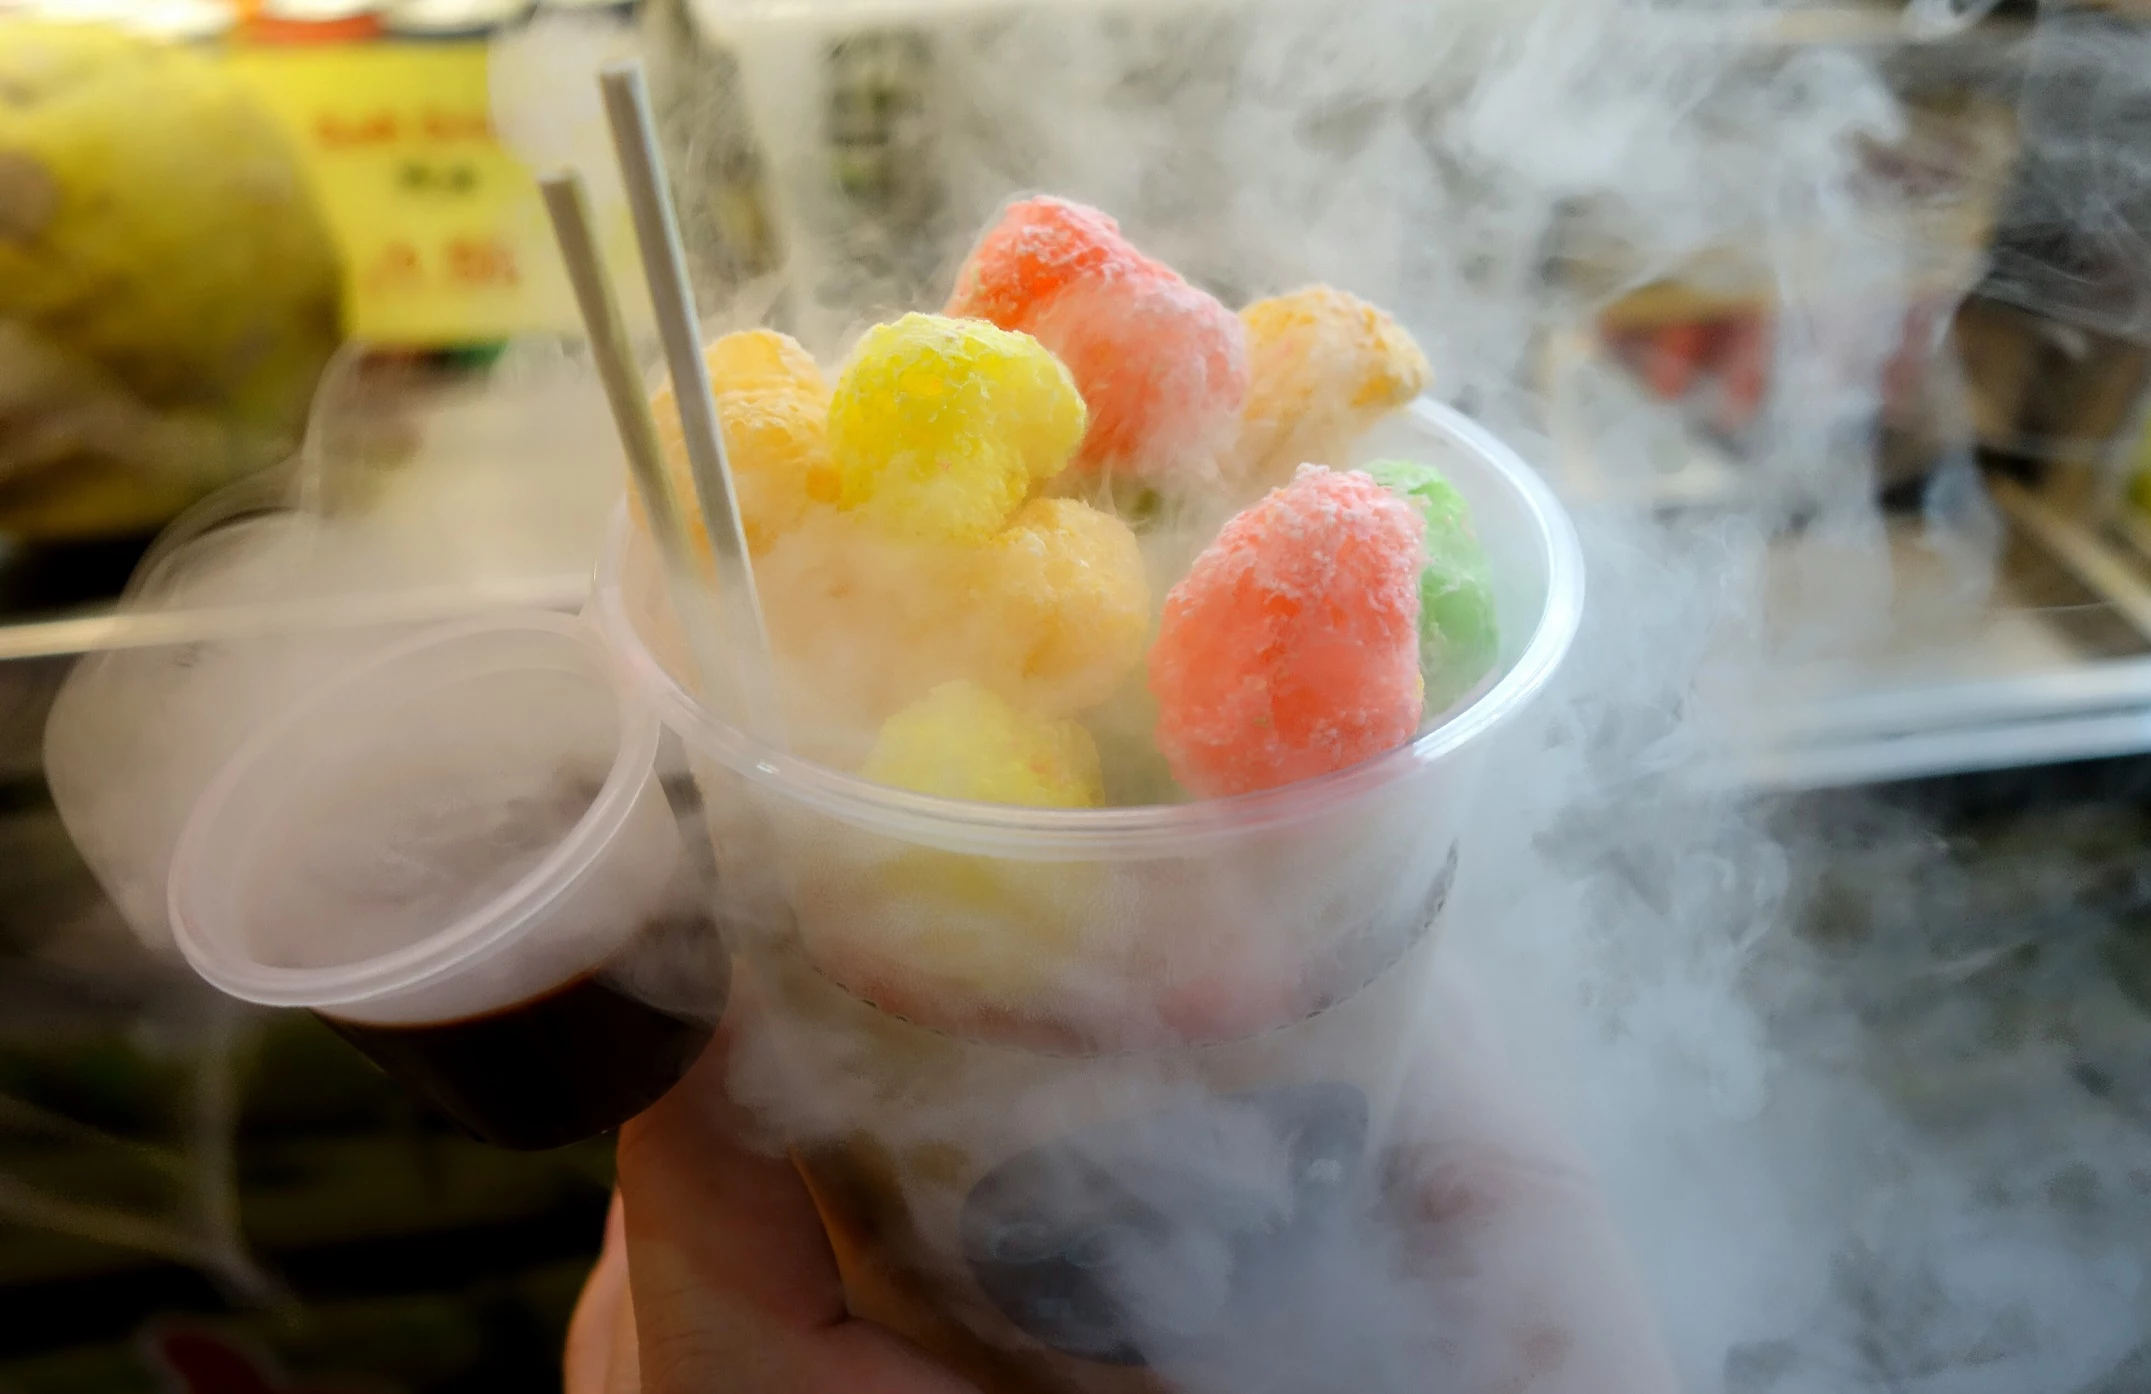 Popular Dragon S Breath Snack Looks Fun But Can Be Dangerous